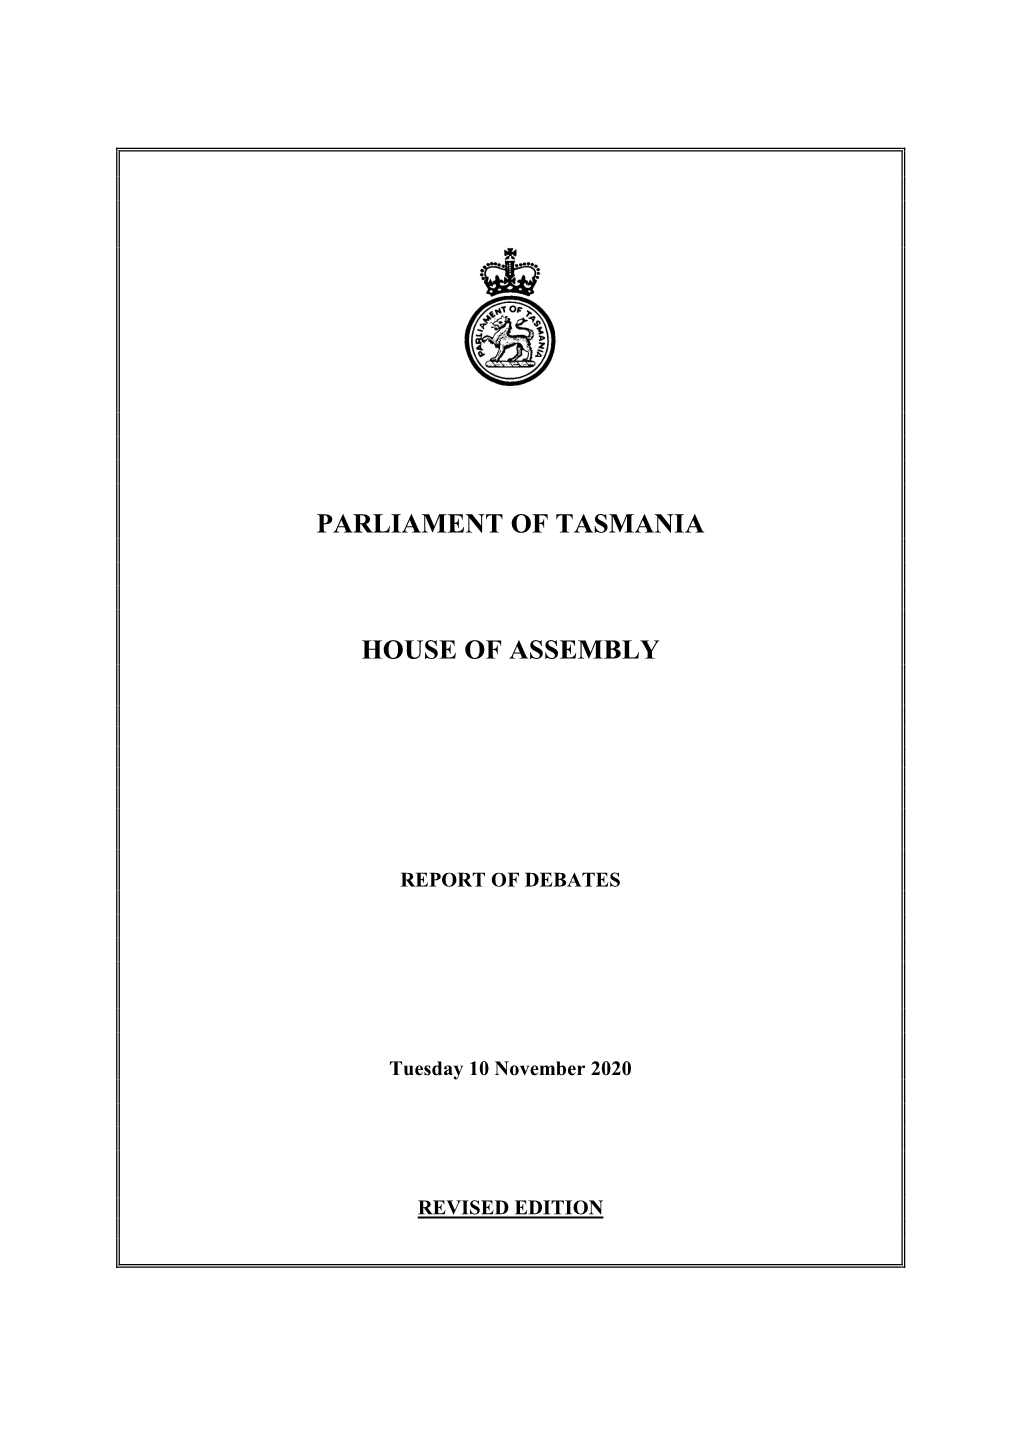 House of Assembly Tuesday 10 November 2020